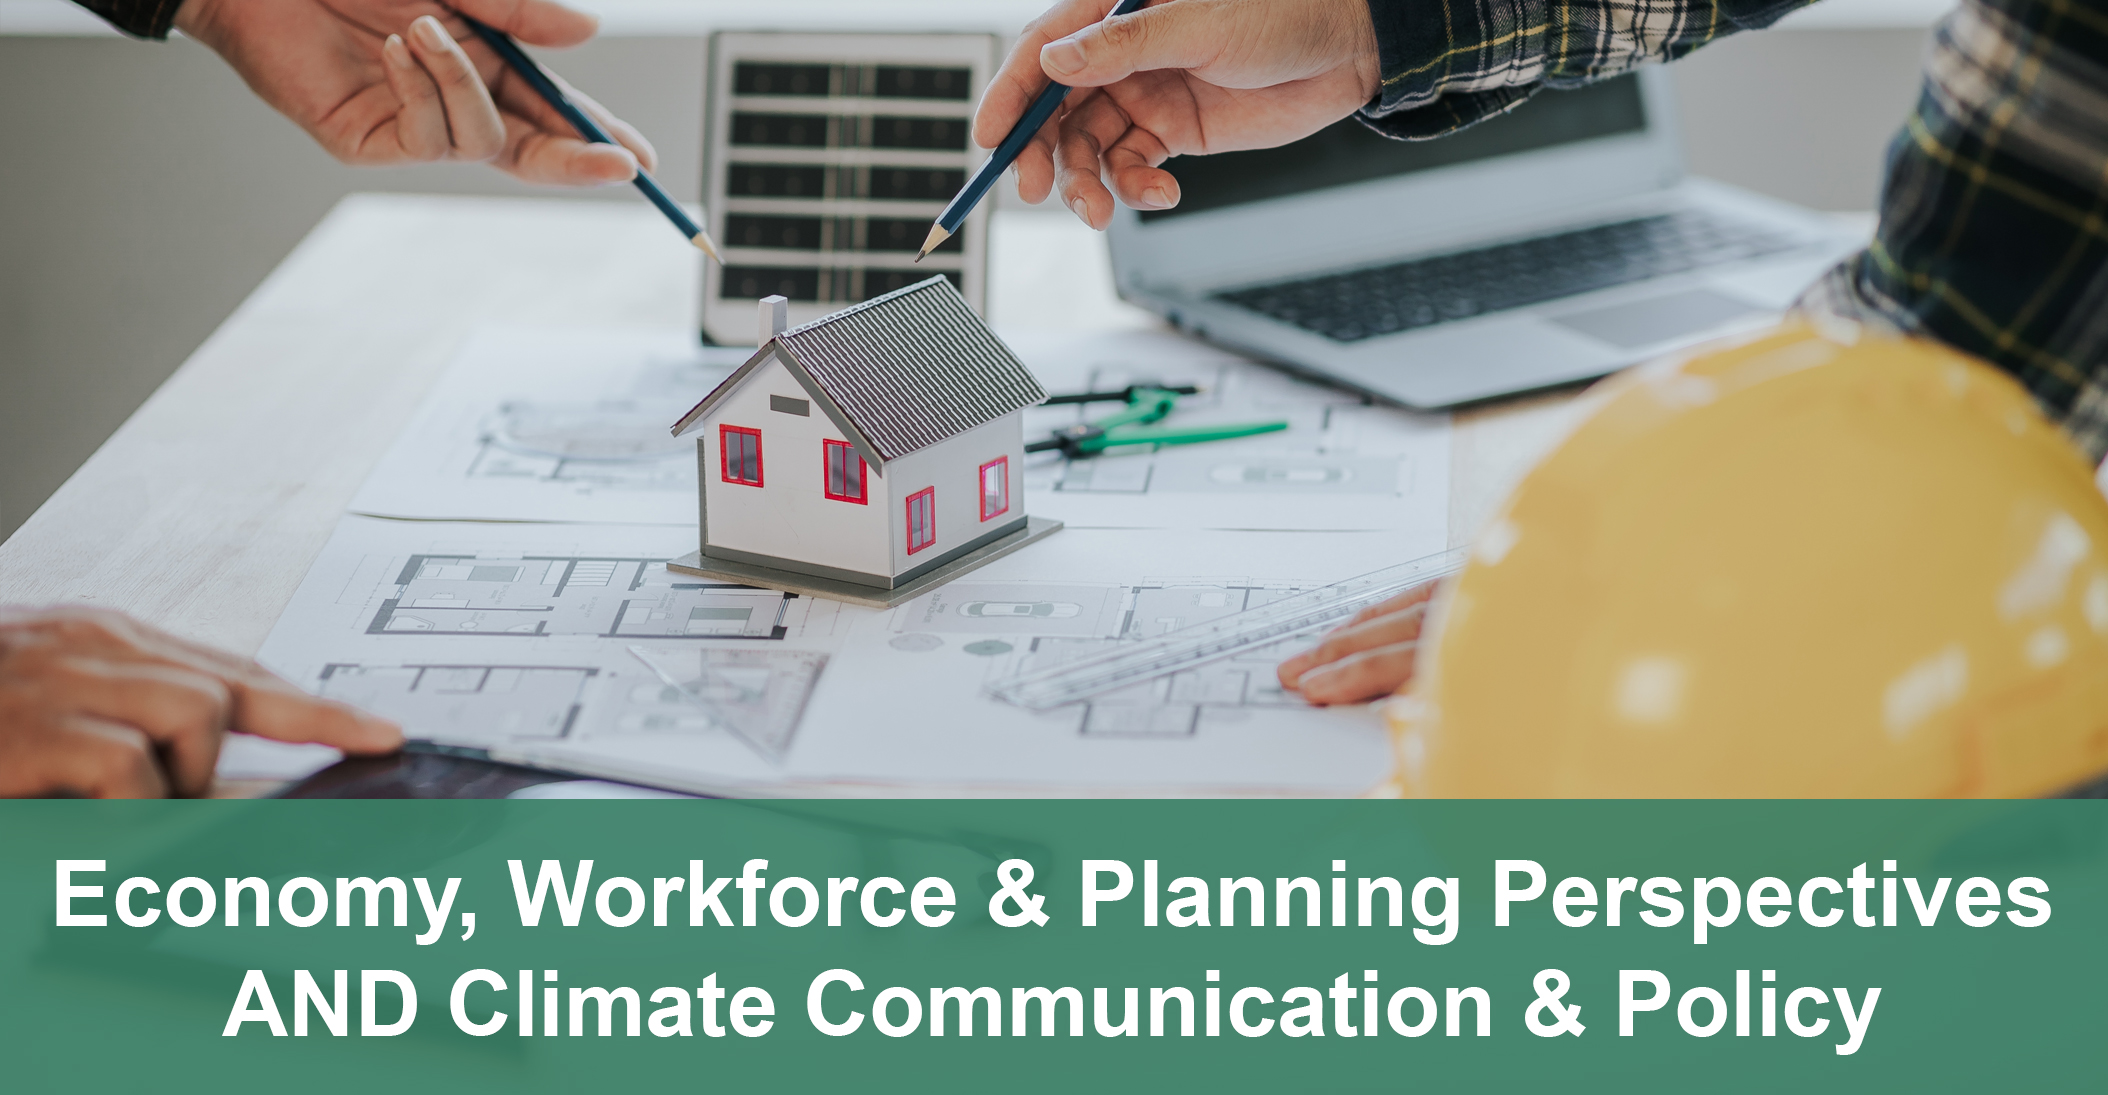 Economy, Workforce & Planning Perspectives AND Climate Communication & Policy 